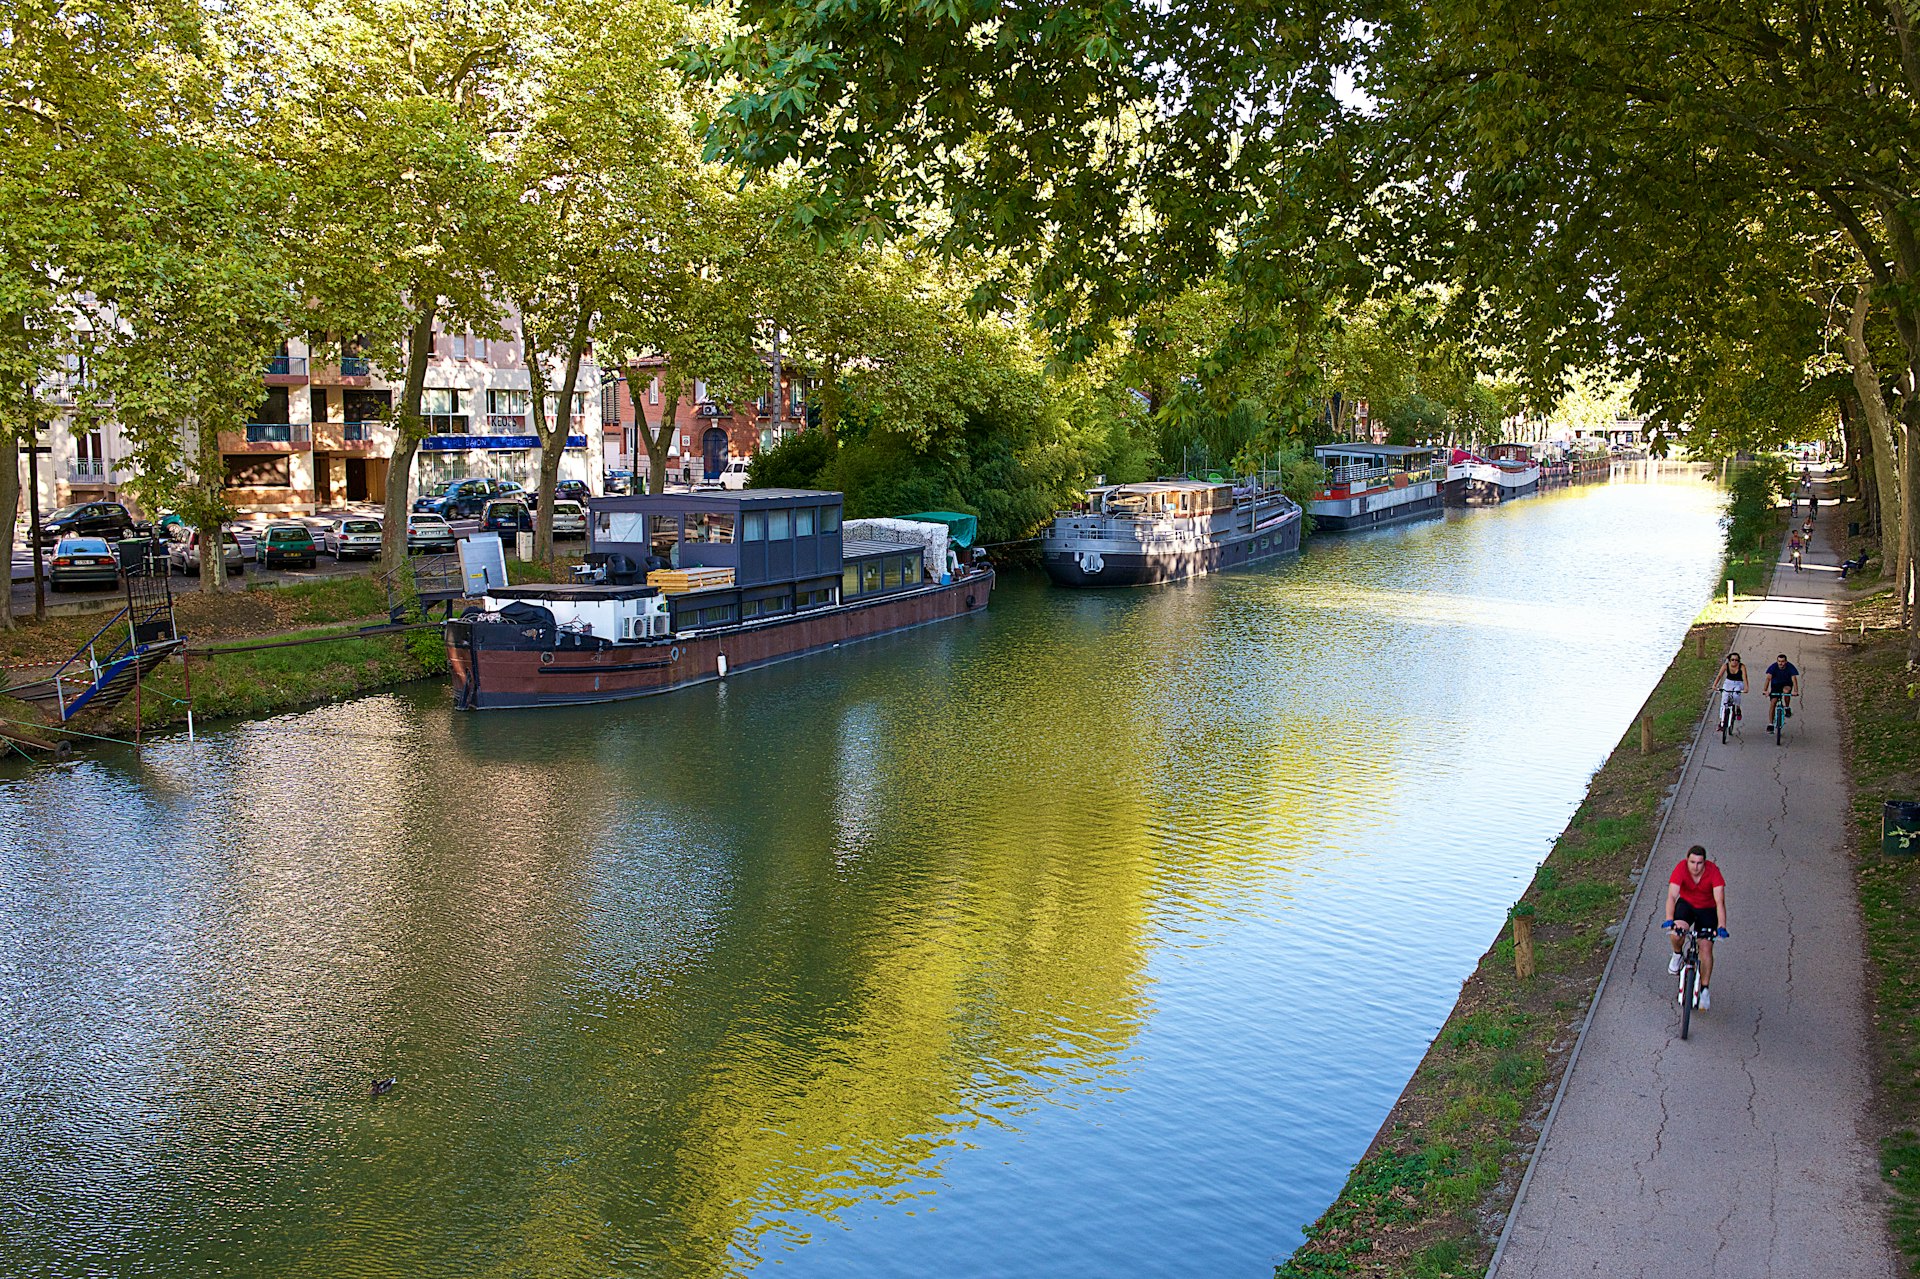 The Canal du Midi in the city of Toulouse, which is a 240 km long canal in Southern France.